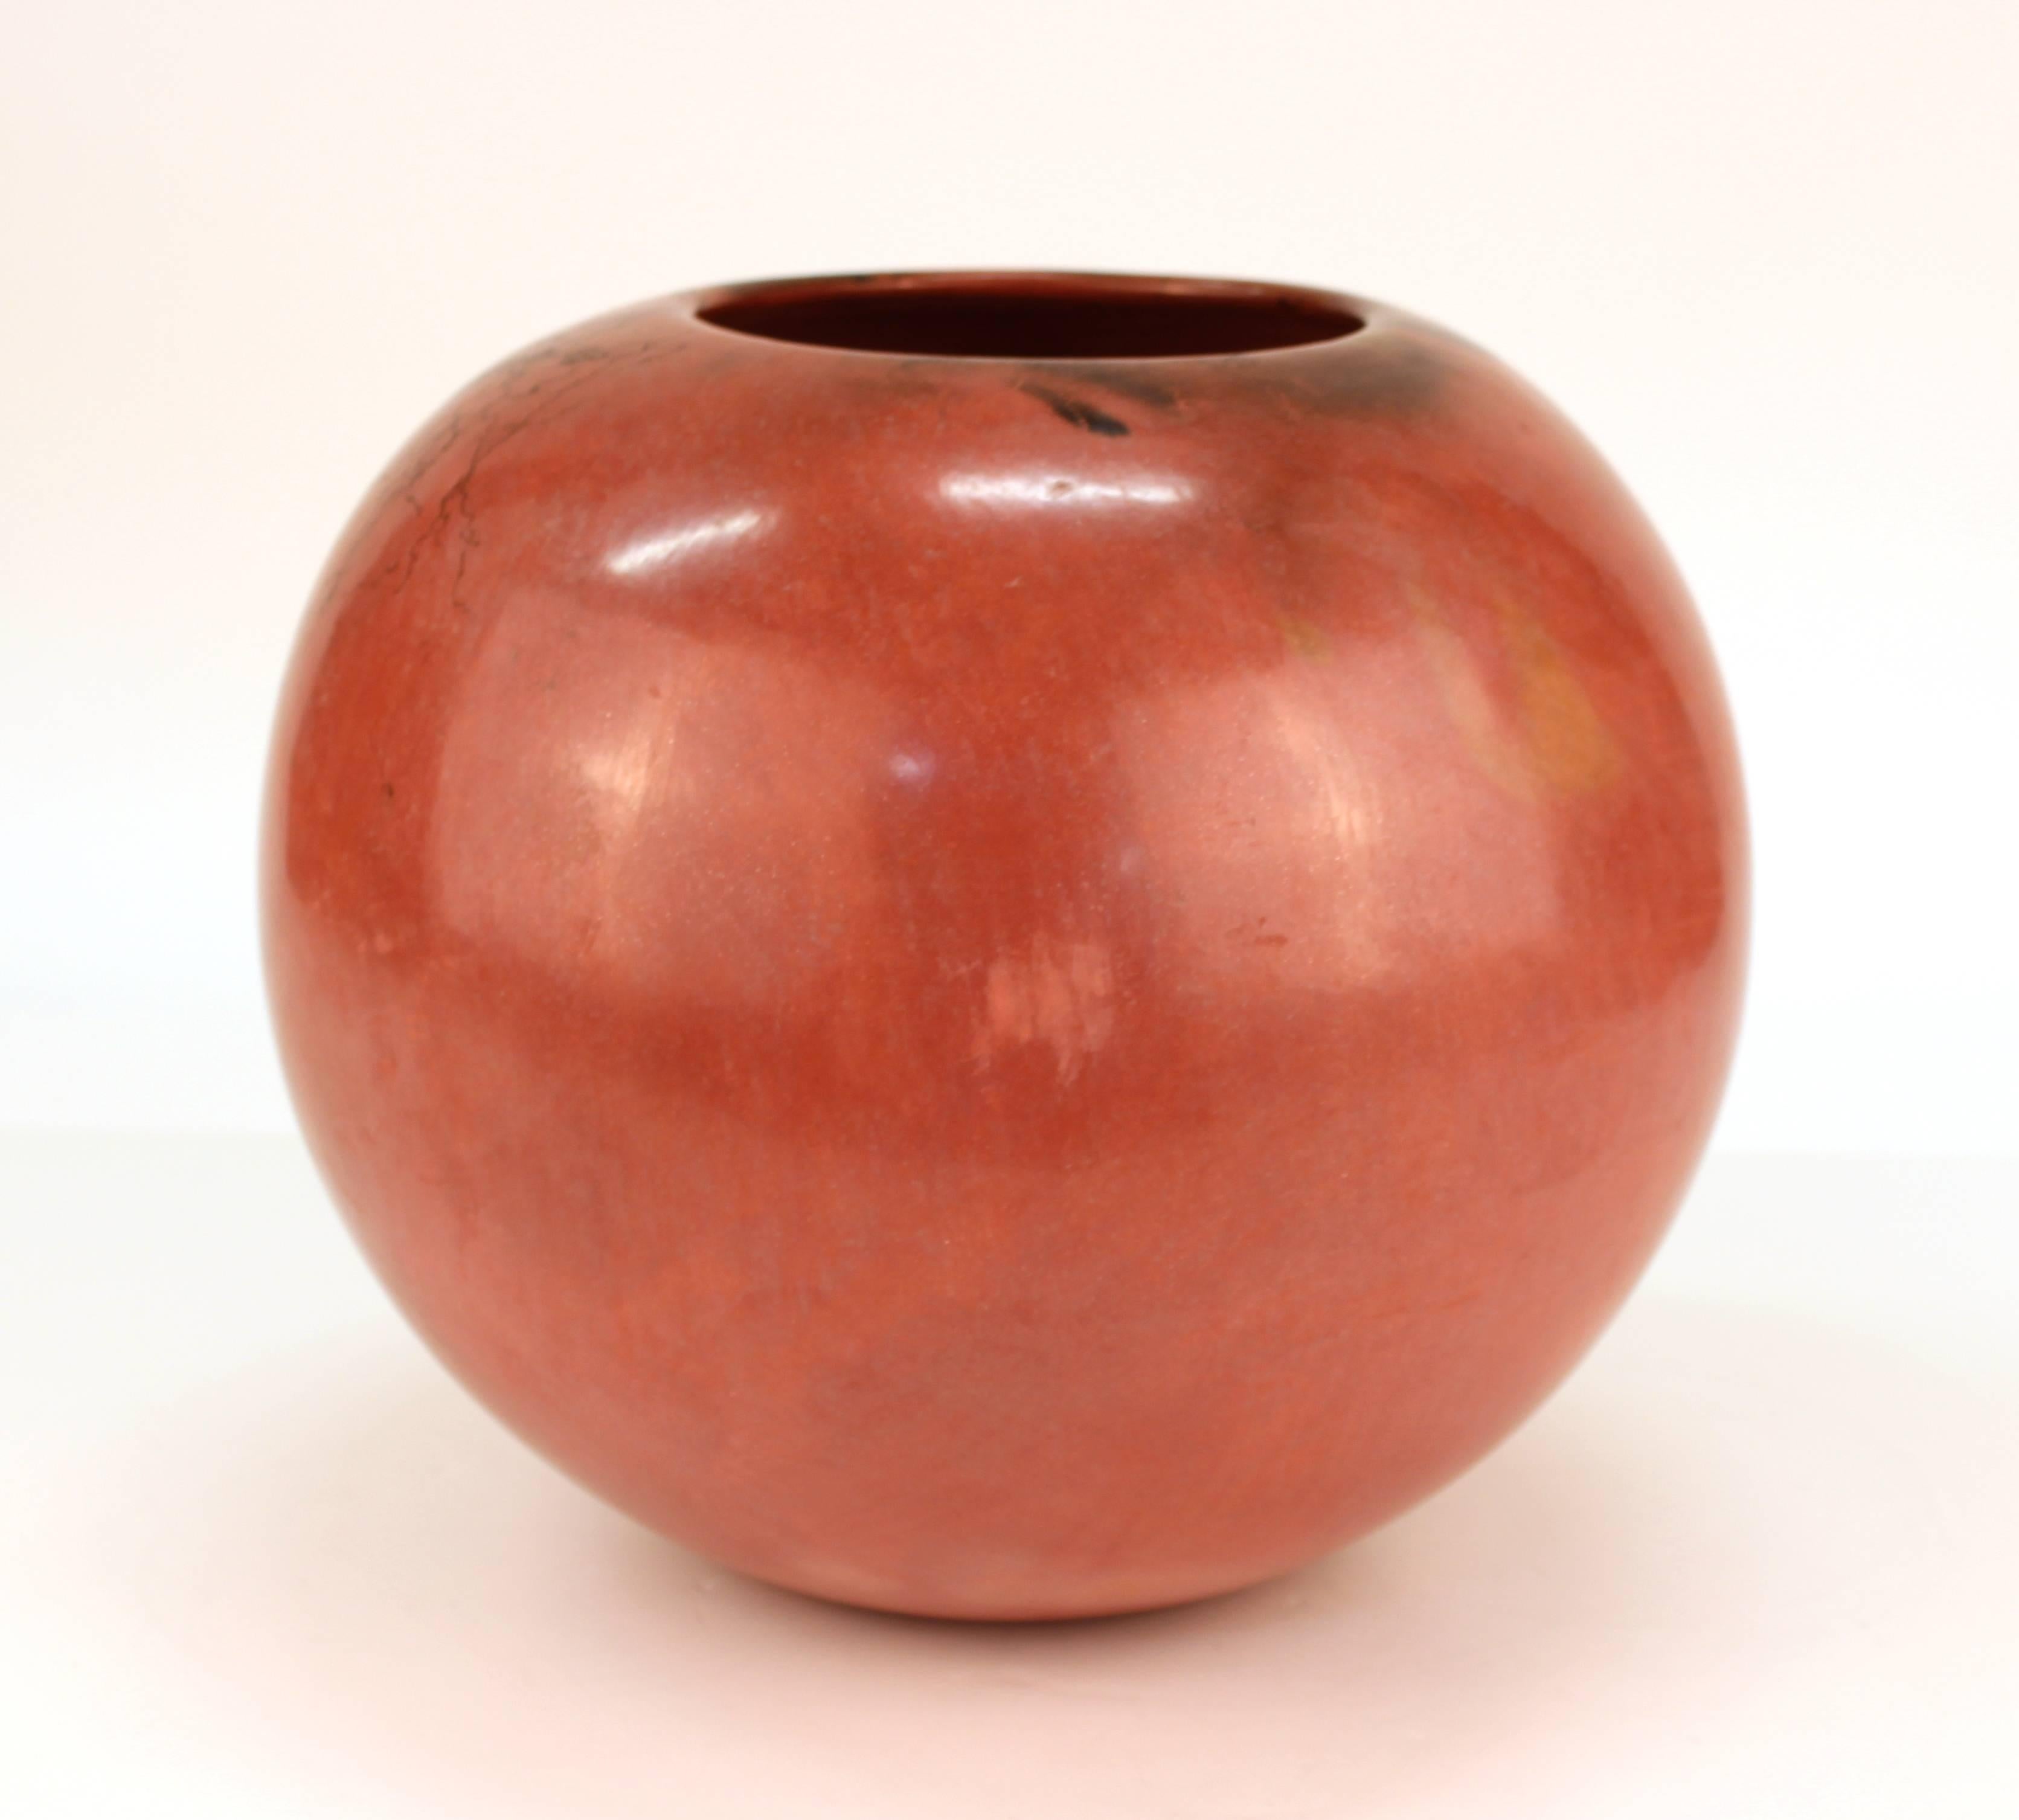 Modern Mary Witkop New Mexico Pueblo Pottery Vessel in Pomegranate Red